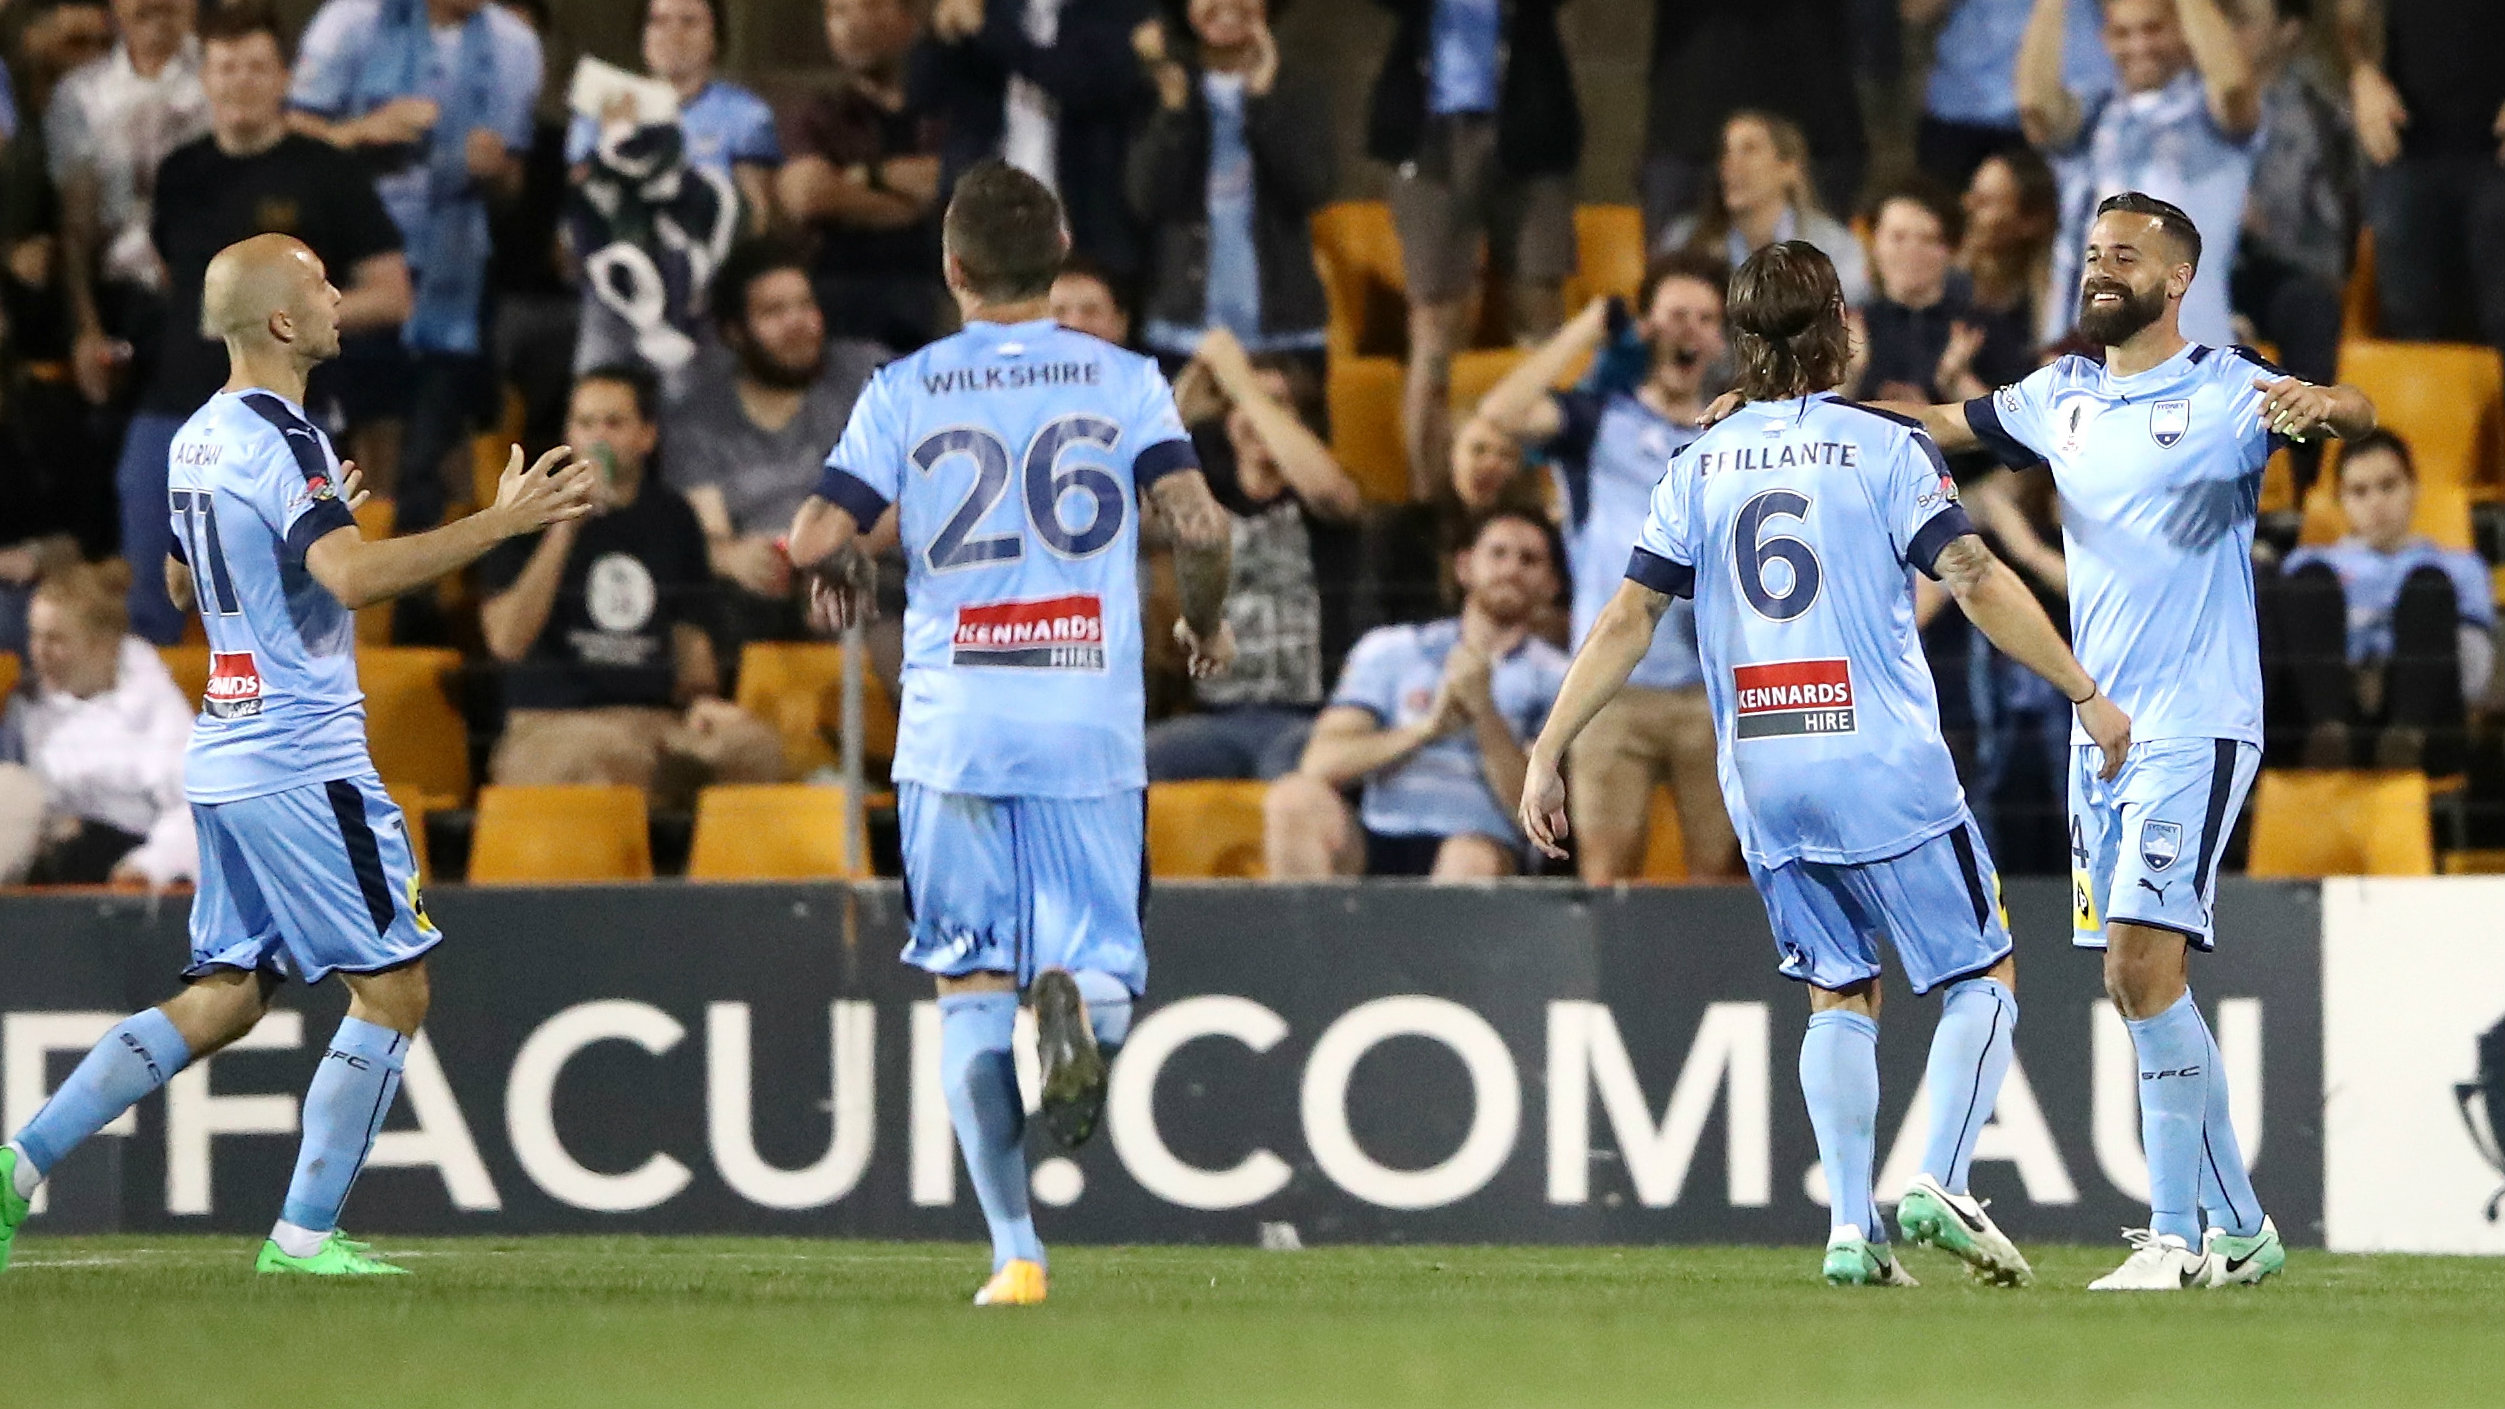 Sydney FC will face South Melbourne in the Westfield FFA Cup Semi Finals.